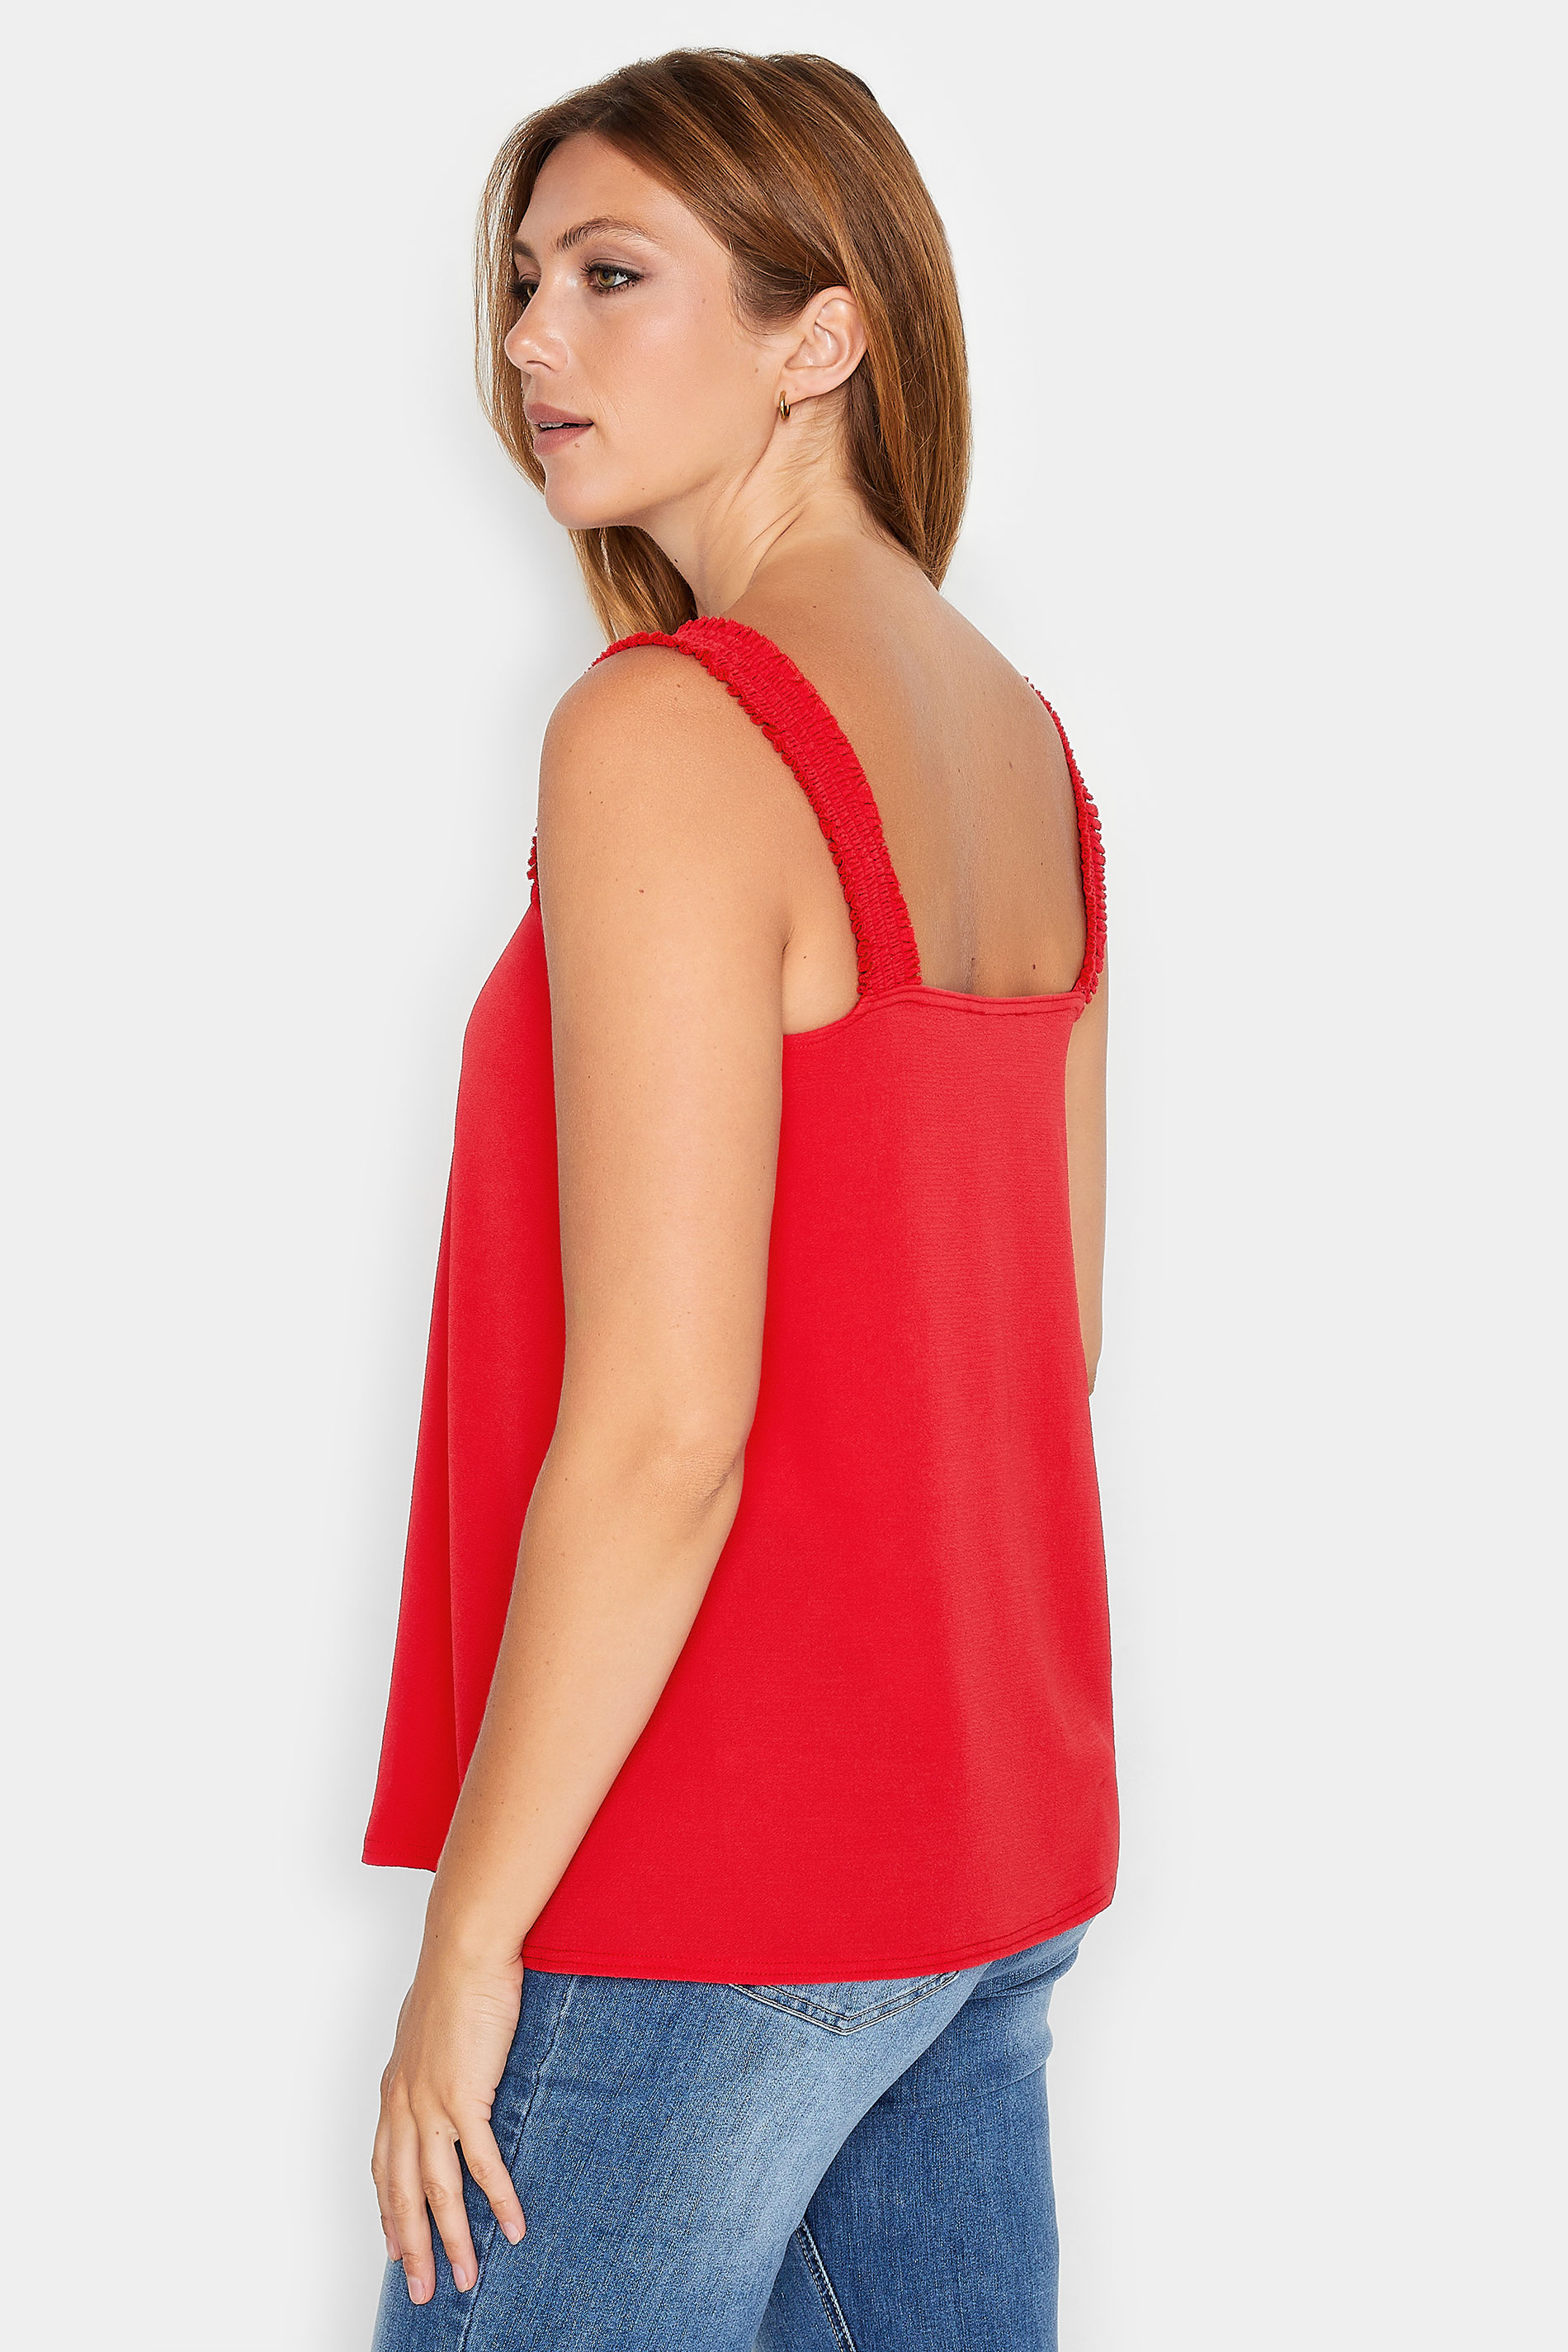 LTS Tall Women's Red Ruched Swing Cami Top 3